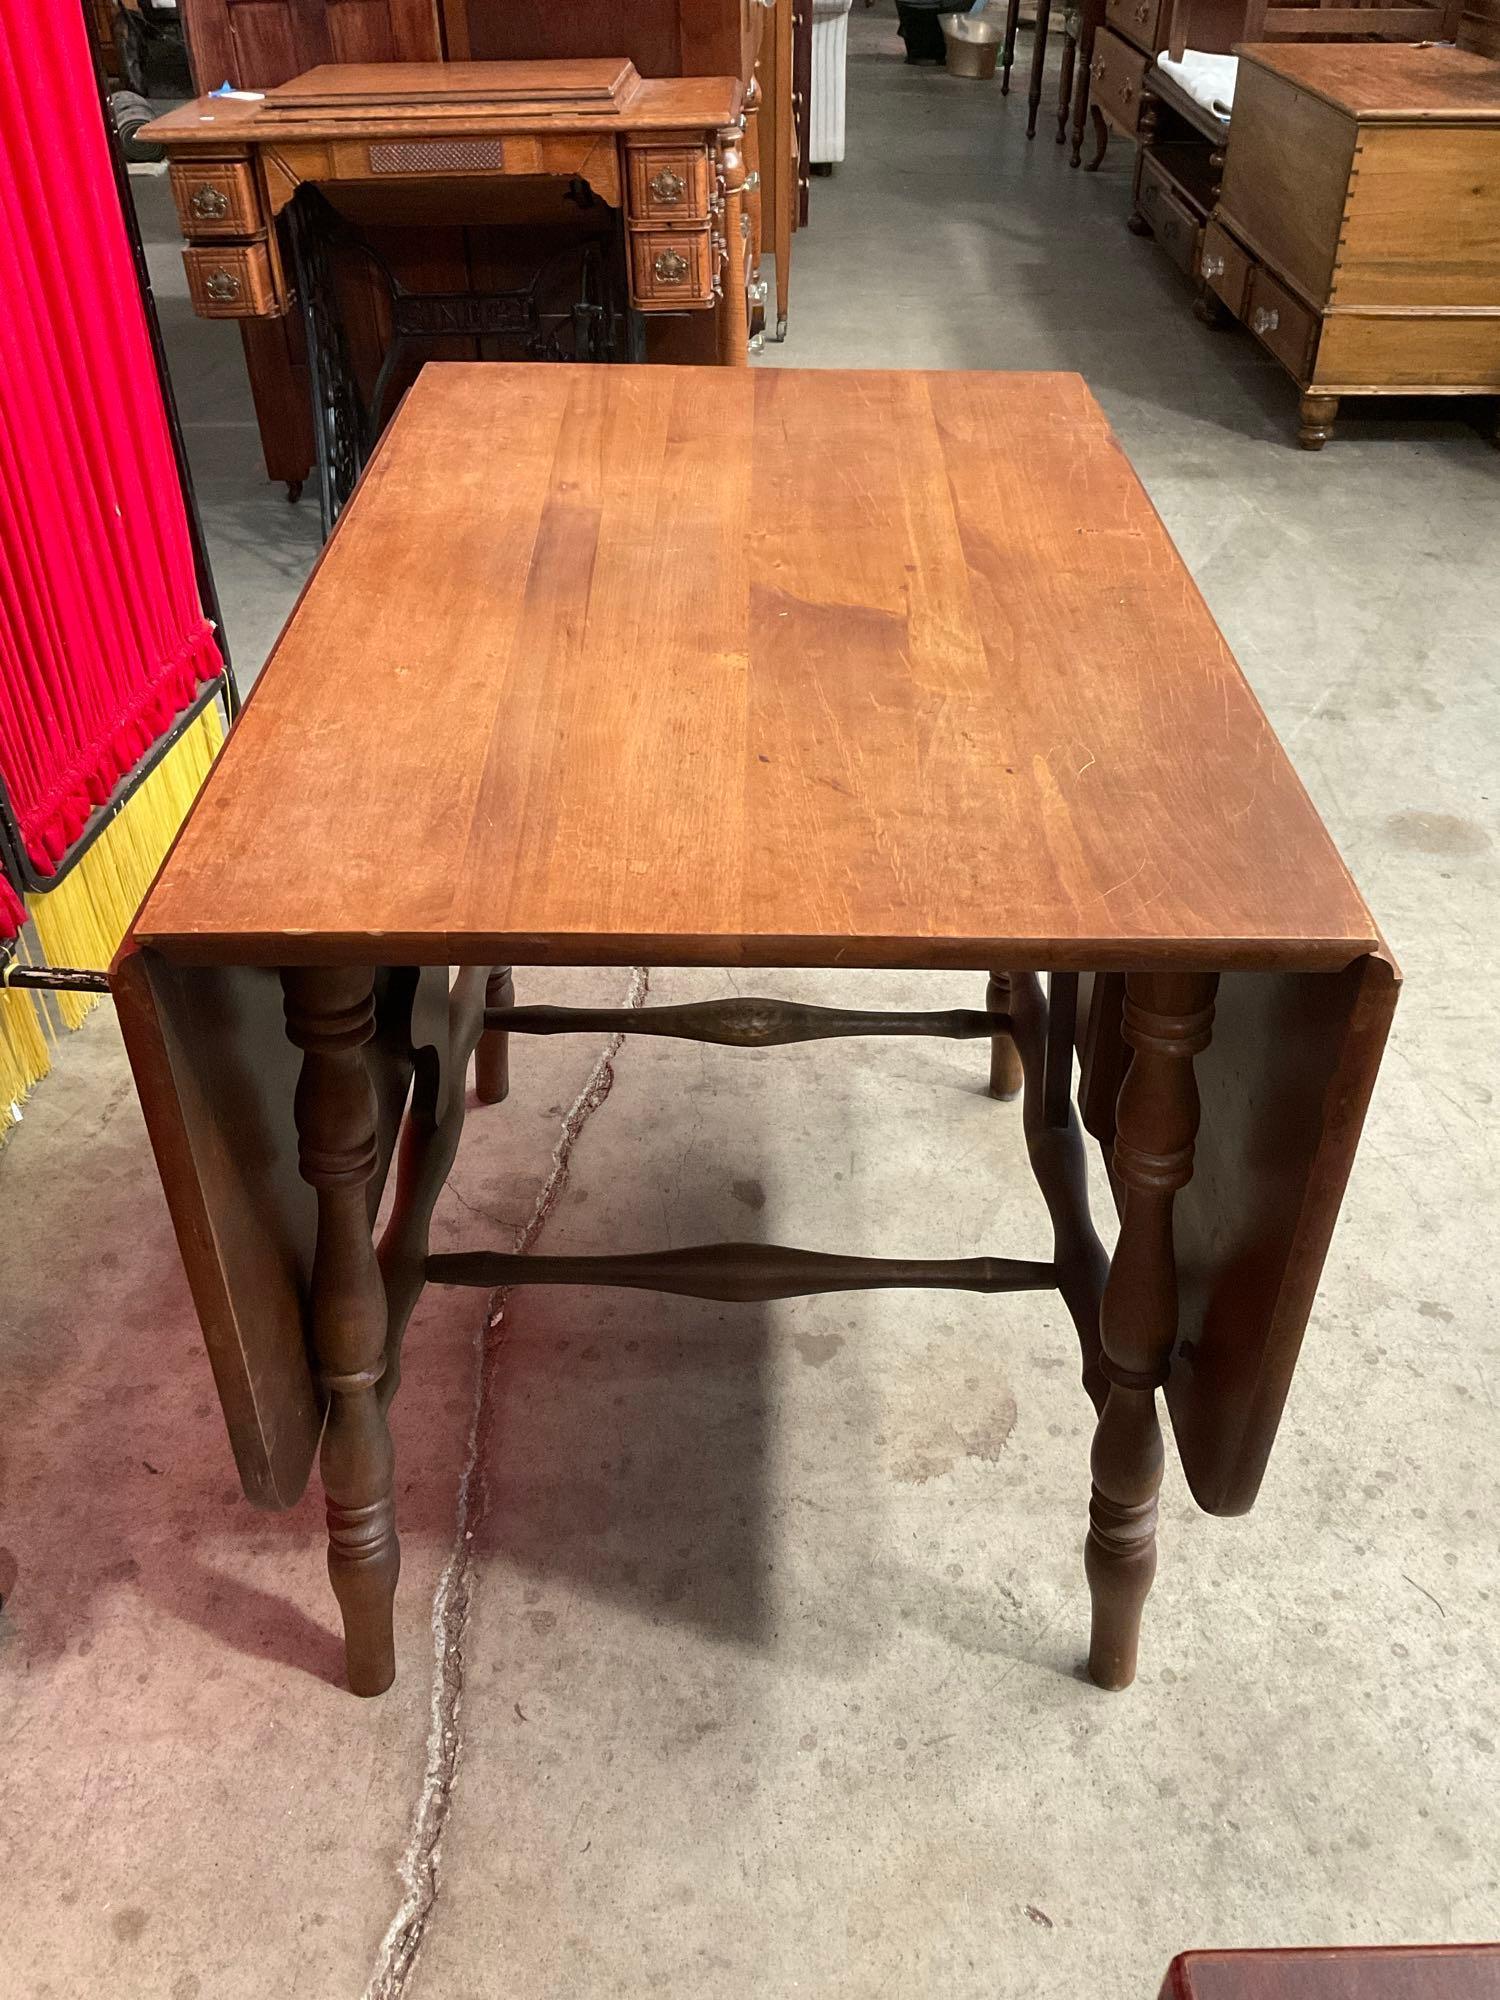 Vintage Wooden Drop Leaf Dining Table w/ Spindle Legs. 22" Wide w/o Leaves, 58" w/ Leaves. See pi...